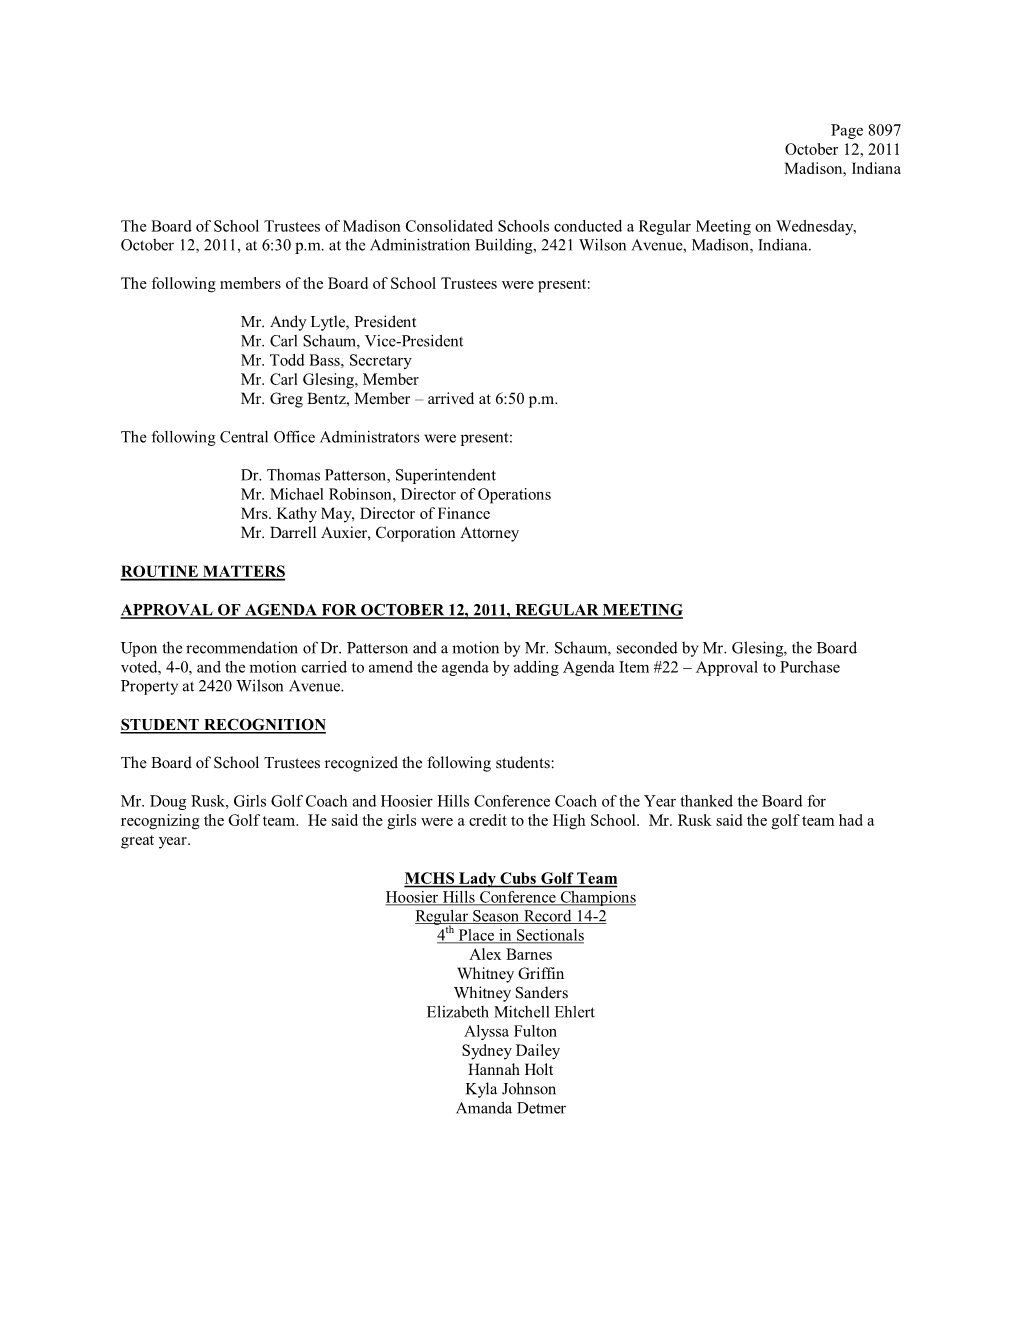 Page 8097 October 12, 2011 Madison, Indiana the Board of School Trustees of Madison Consolidated Schools Conducted a Regular